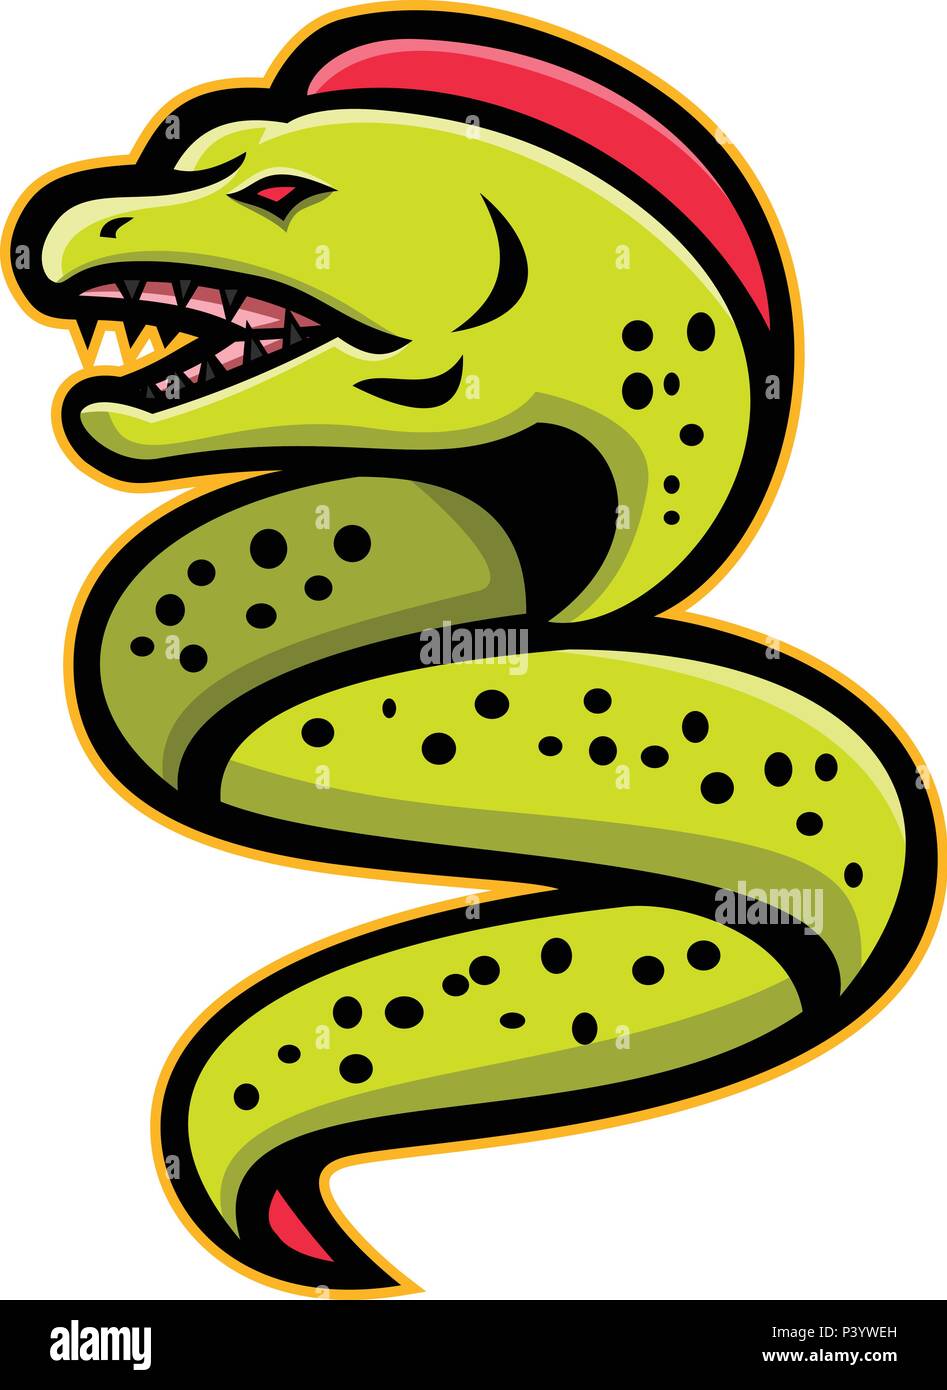 Mascot icon illustration of an angry moray eel or muraenidae with pharyngeal jaw going up viewed from side on isolated background in retro style. Stock Vector